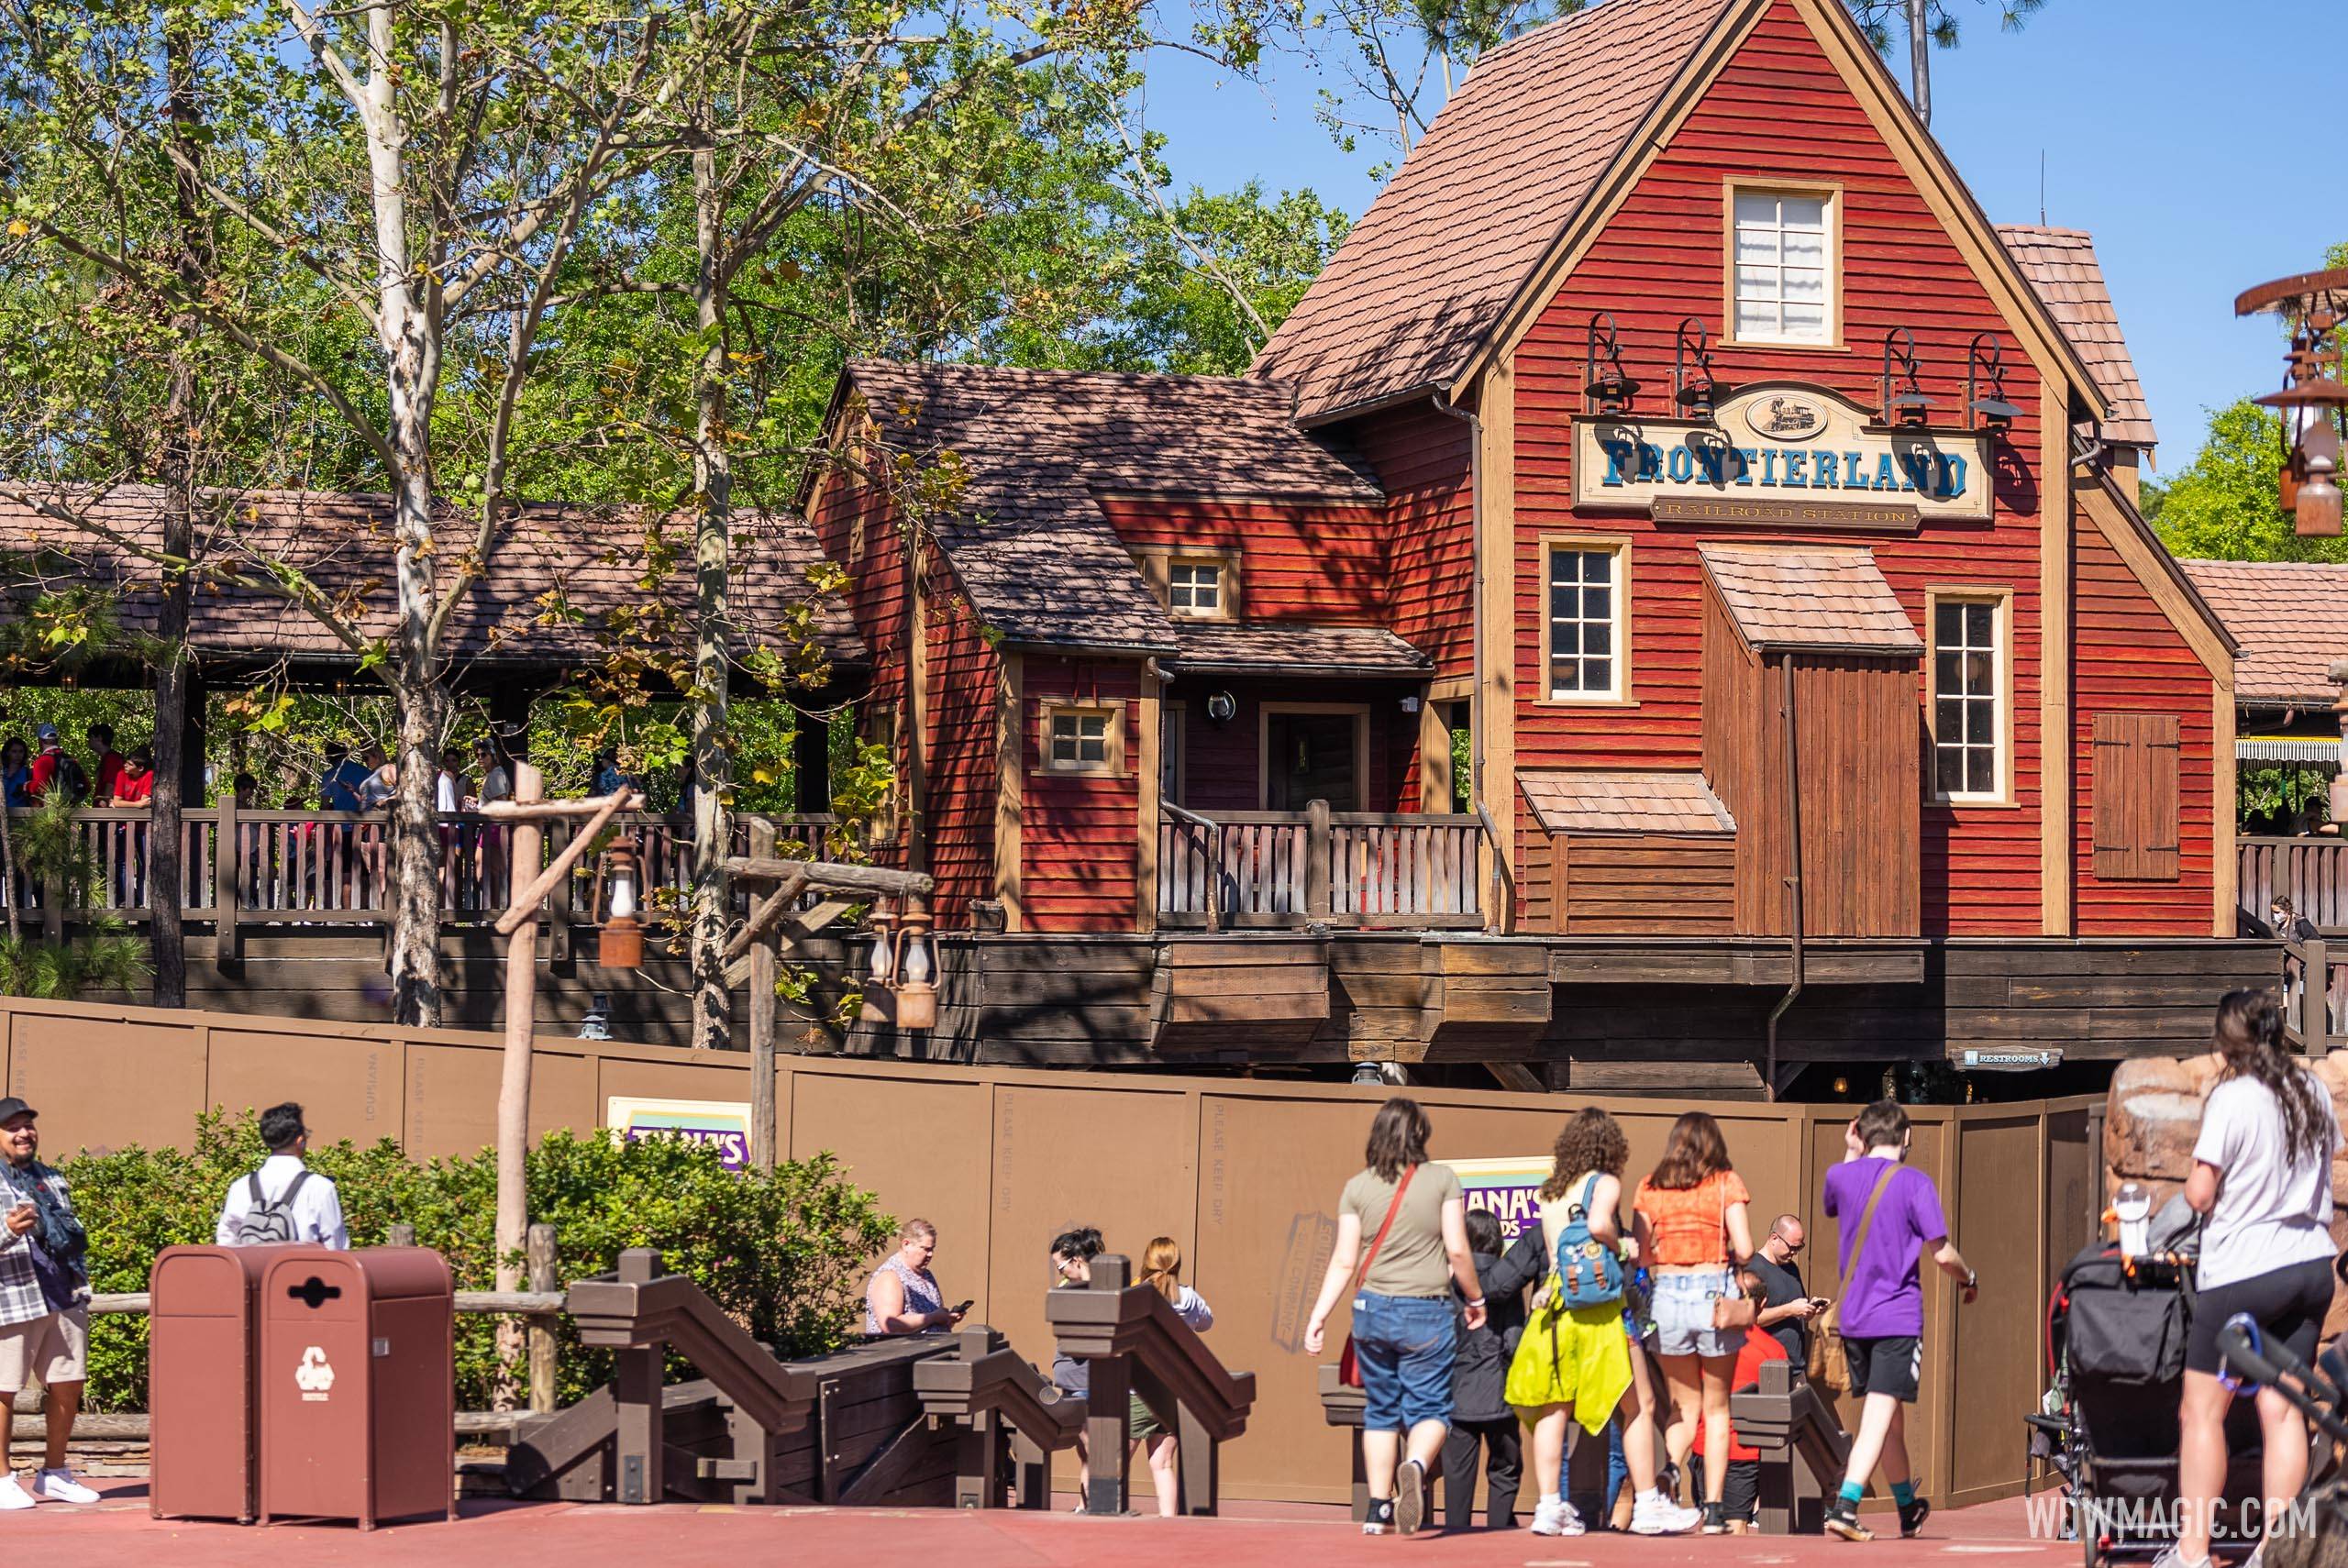 Last of the Splash Mountain signage removed as work continues at Tiana's Bayou Adventure in Magic Kingdom